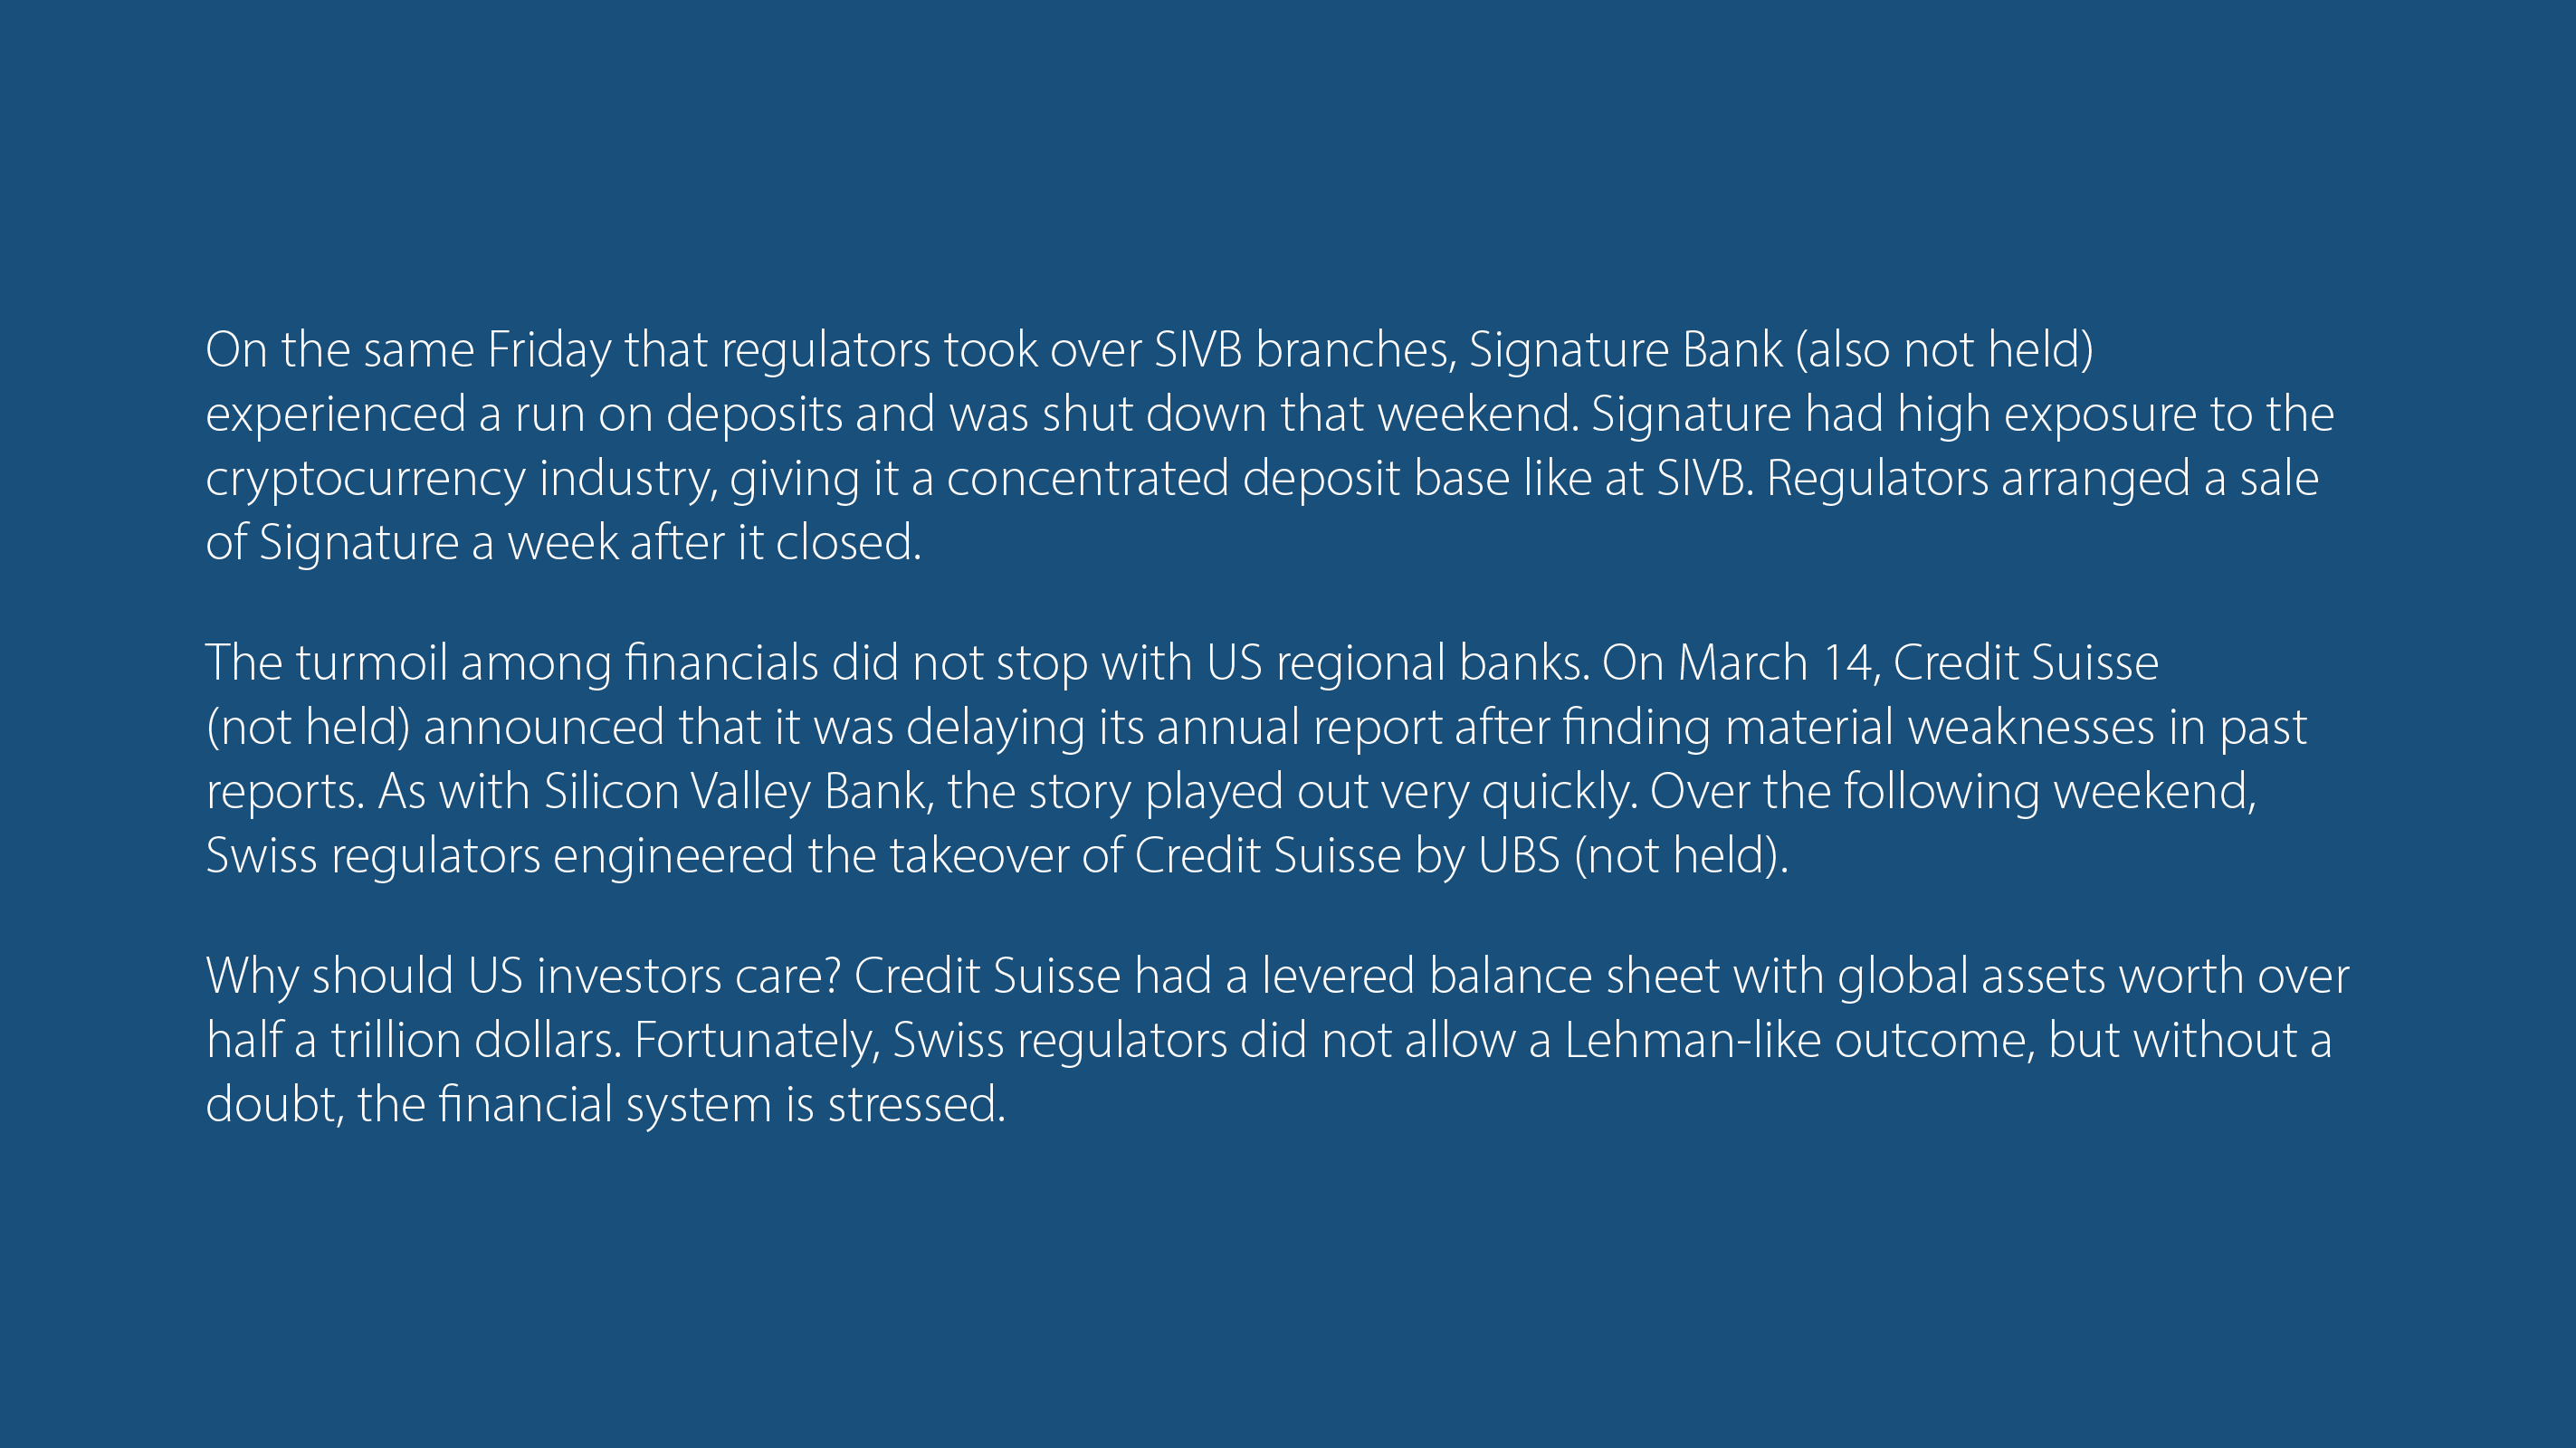 On the same Friday that regulators took over SIVB branches